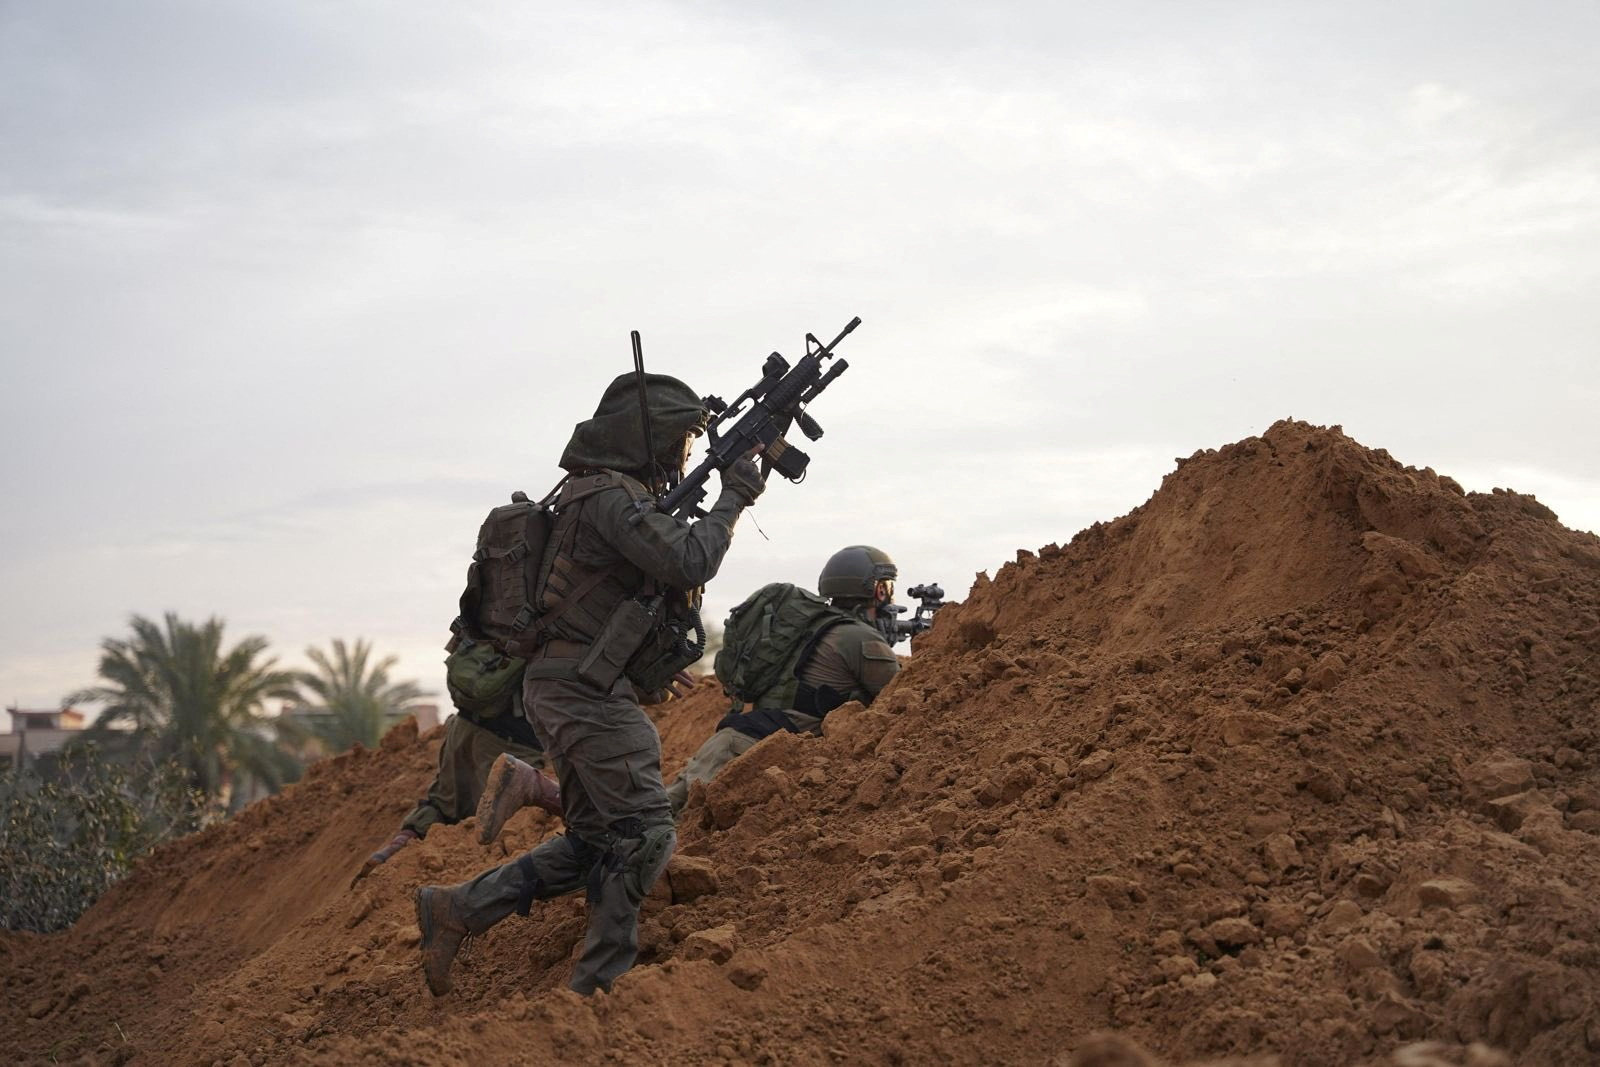 Israeli soldiers operating in the Gaza Strip. Photo: Israel Defence Forces via Reuters